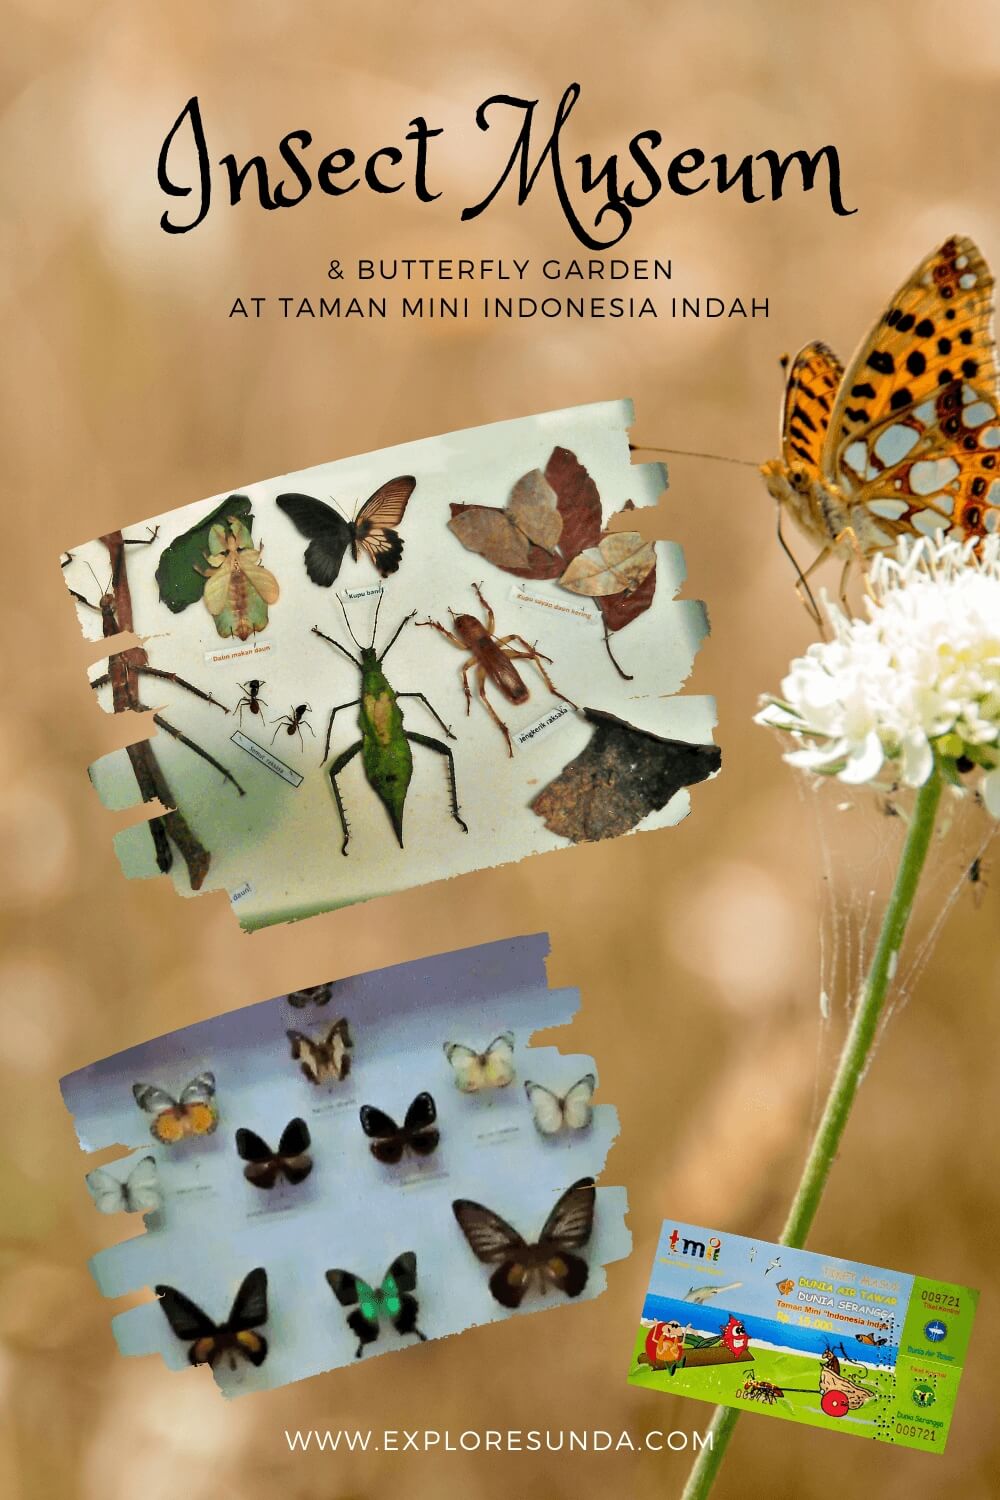 See the diverse insects, fishes, and other freshwater animals in the Insect Museum, the Butterfly Garden and the Fresh Water World at Taman Mini Indonesia Indah